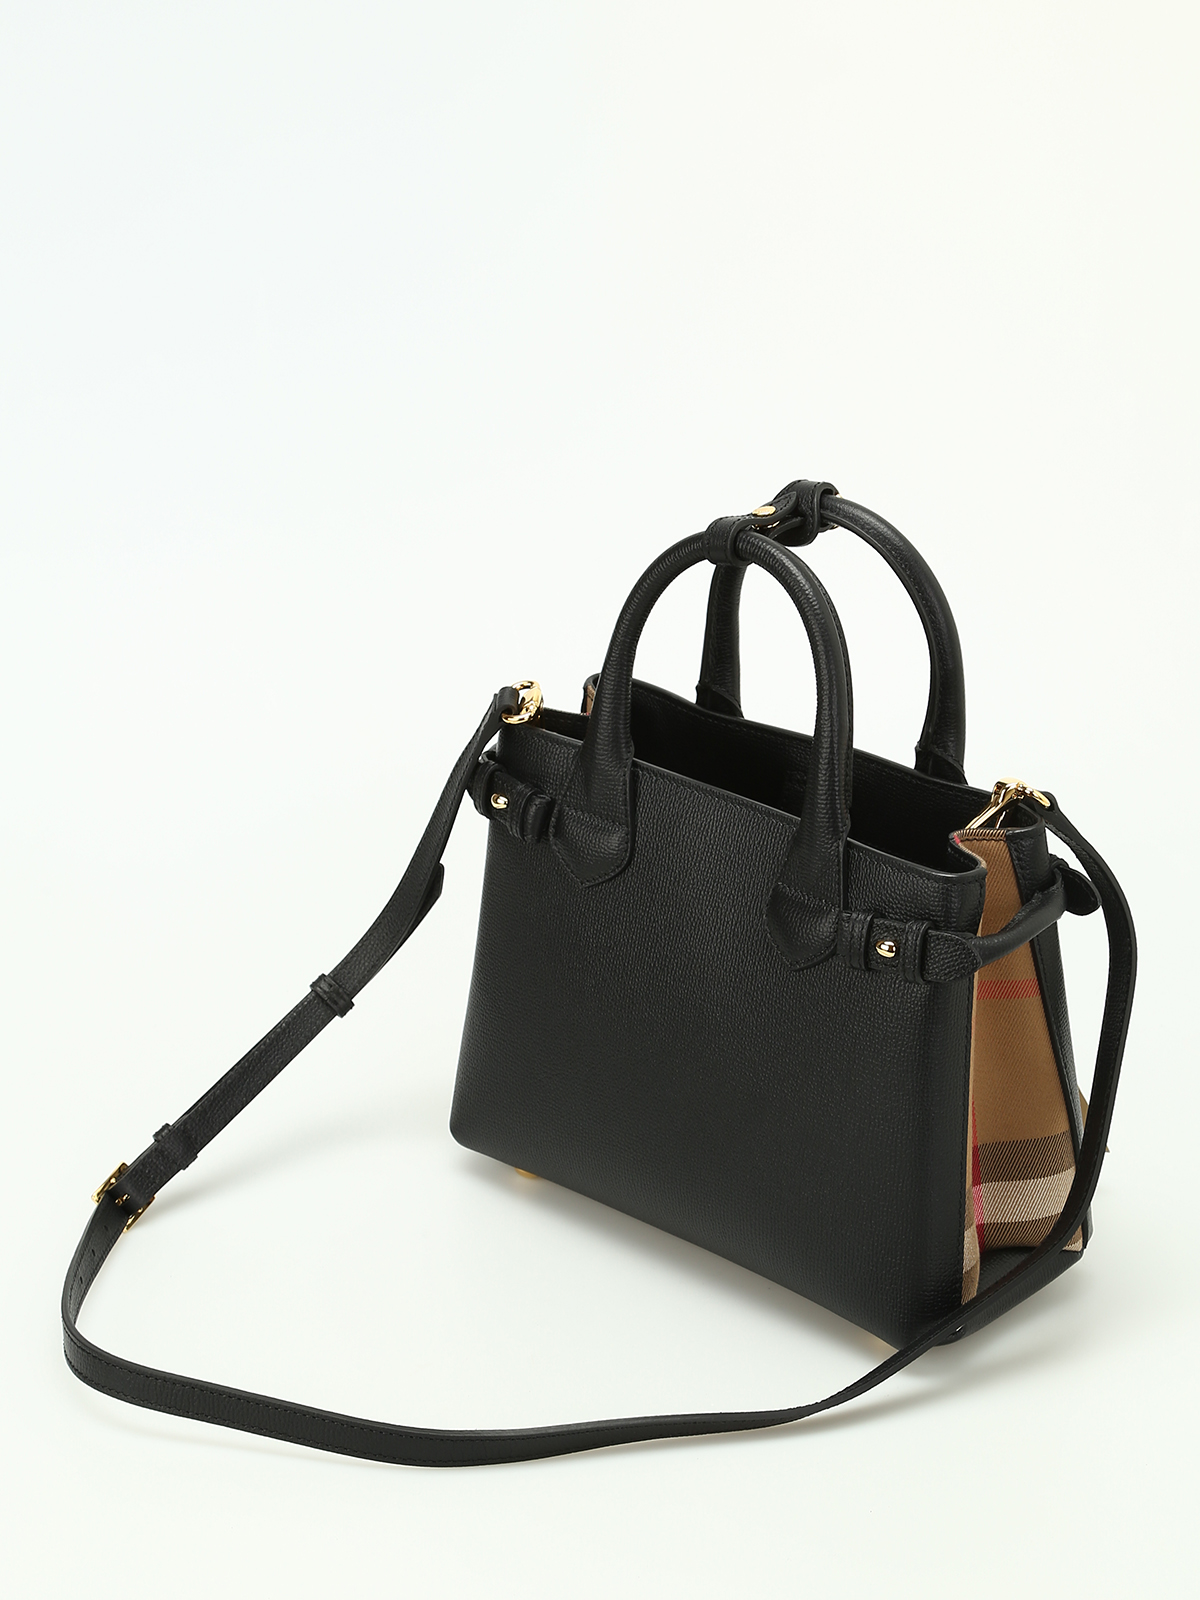 Tranquility platform timeren Totes bags Burberry - The Banner small leather bag - 4023700 | iKRIX.com